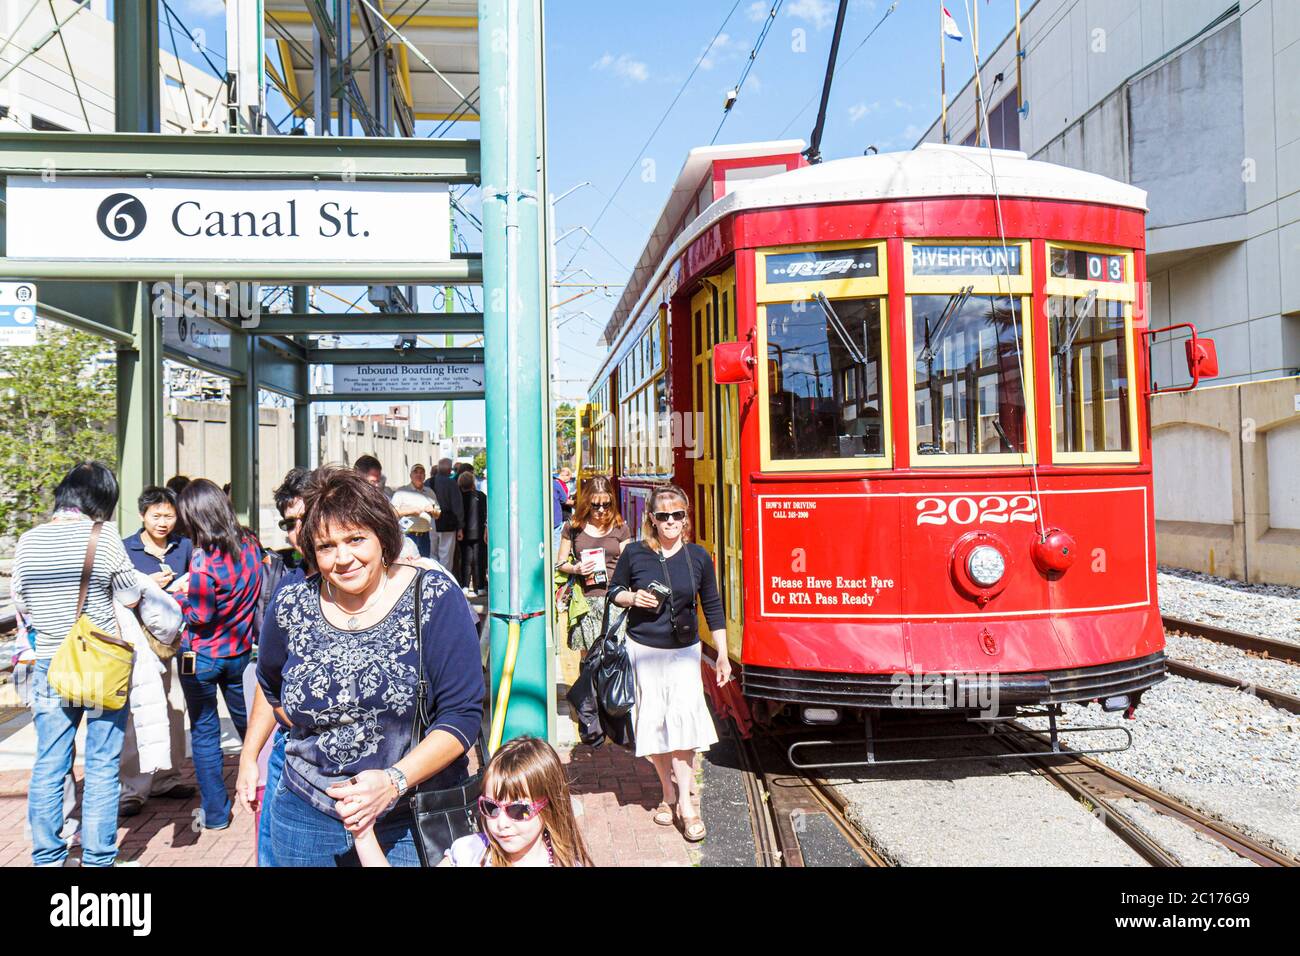 New Orleans Louisiana,Regional Transit Authority,RTA,Riverfront Streetcar Line,Canal Street Station,tram,tramway,arrêt,passagers pilote Banque D'Images